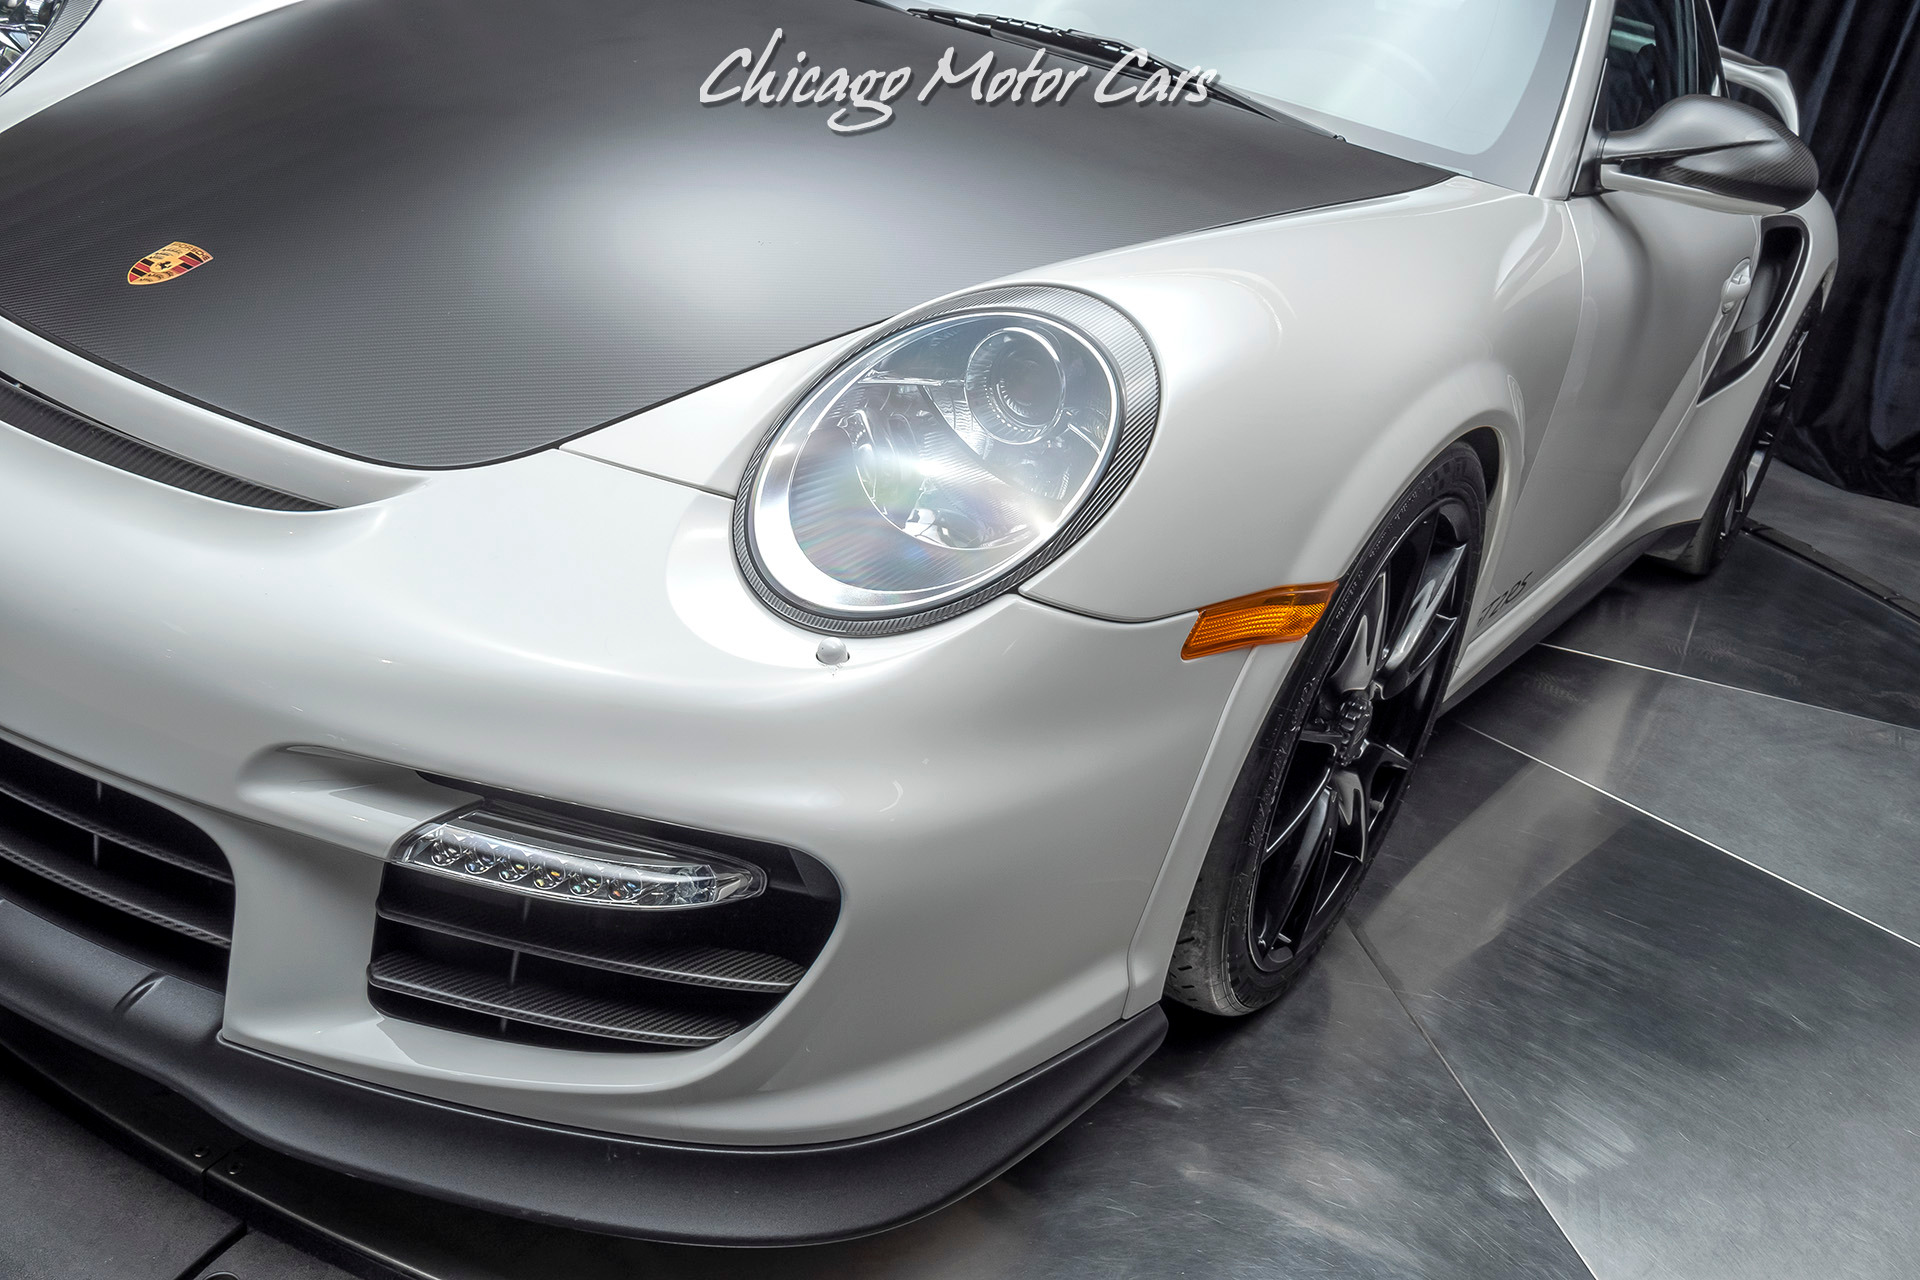 Used-2011-Porsche-911-GT2-RS-Coupe-6-Speed-Manual--327-of-500-Produced